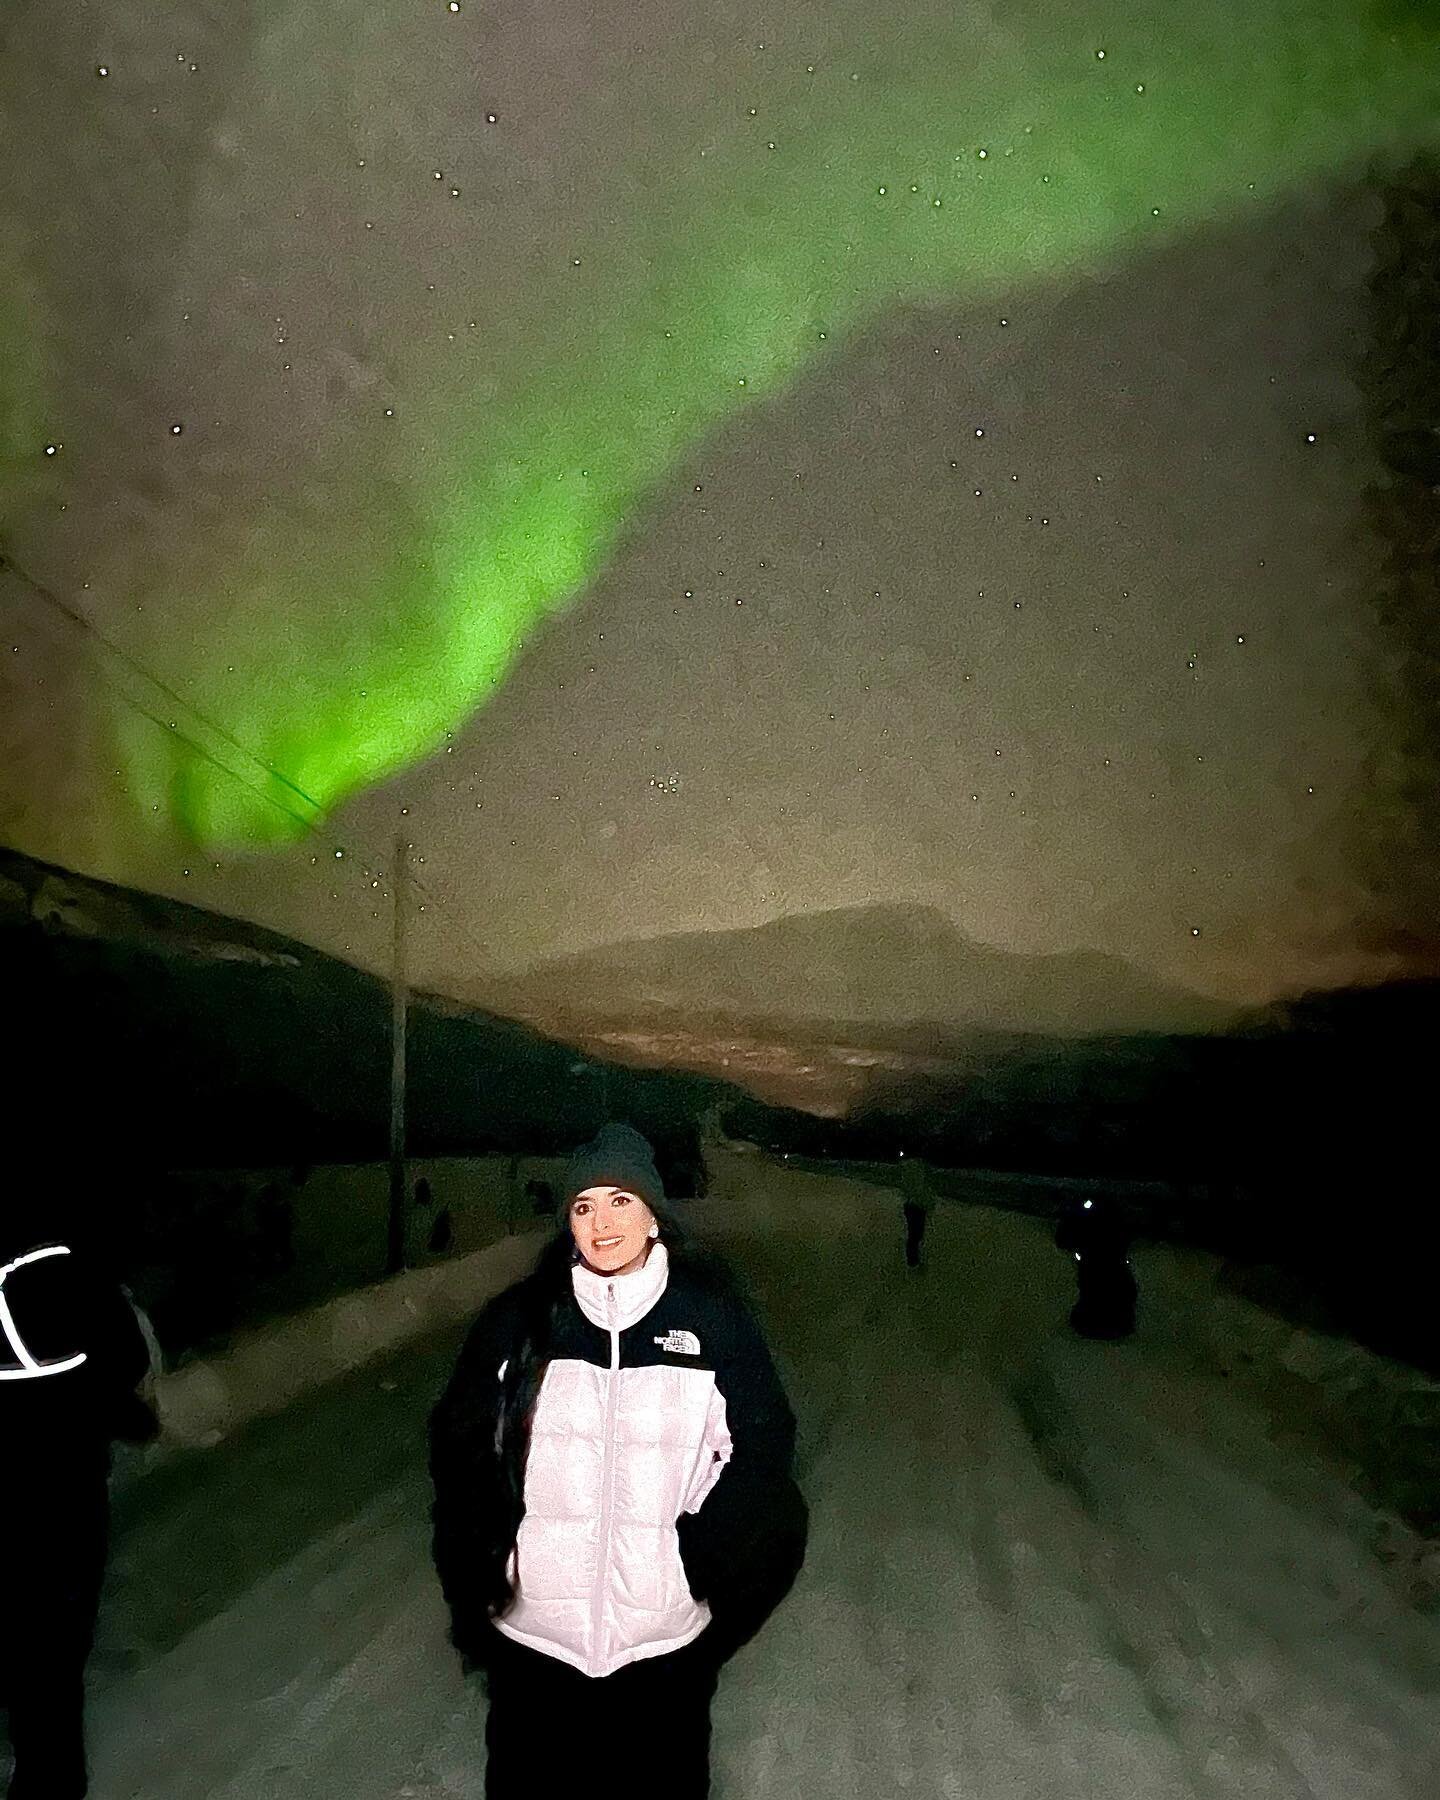 A post dedicated to the Northern Lights, which we were lucky enough to see almost every day of our trip, even with all the light pollution in the city centre 🤩💚

On Day 1, we stared at what we thought were grey-ish clouds, that came out green throu